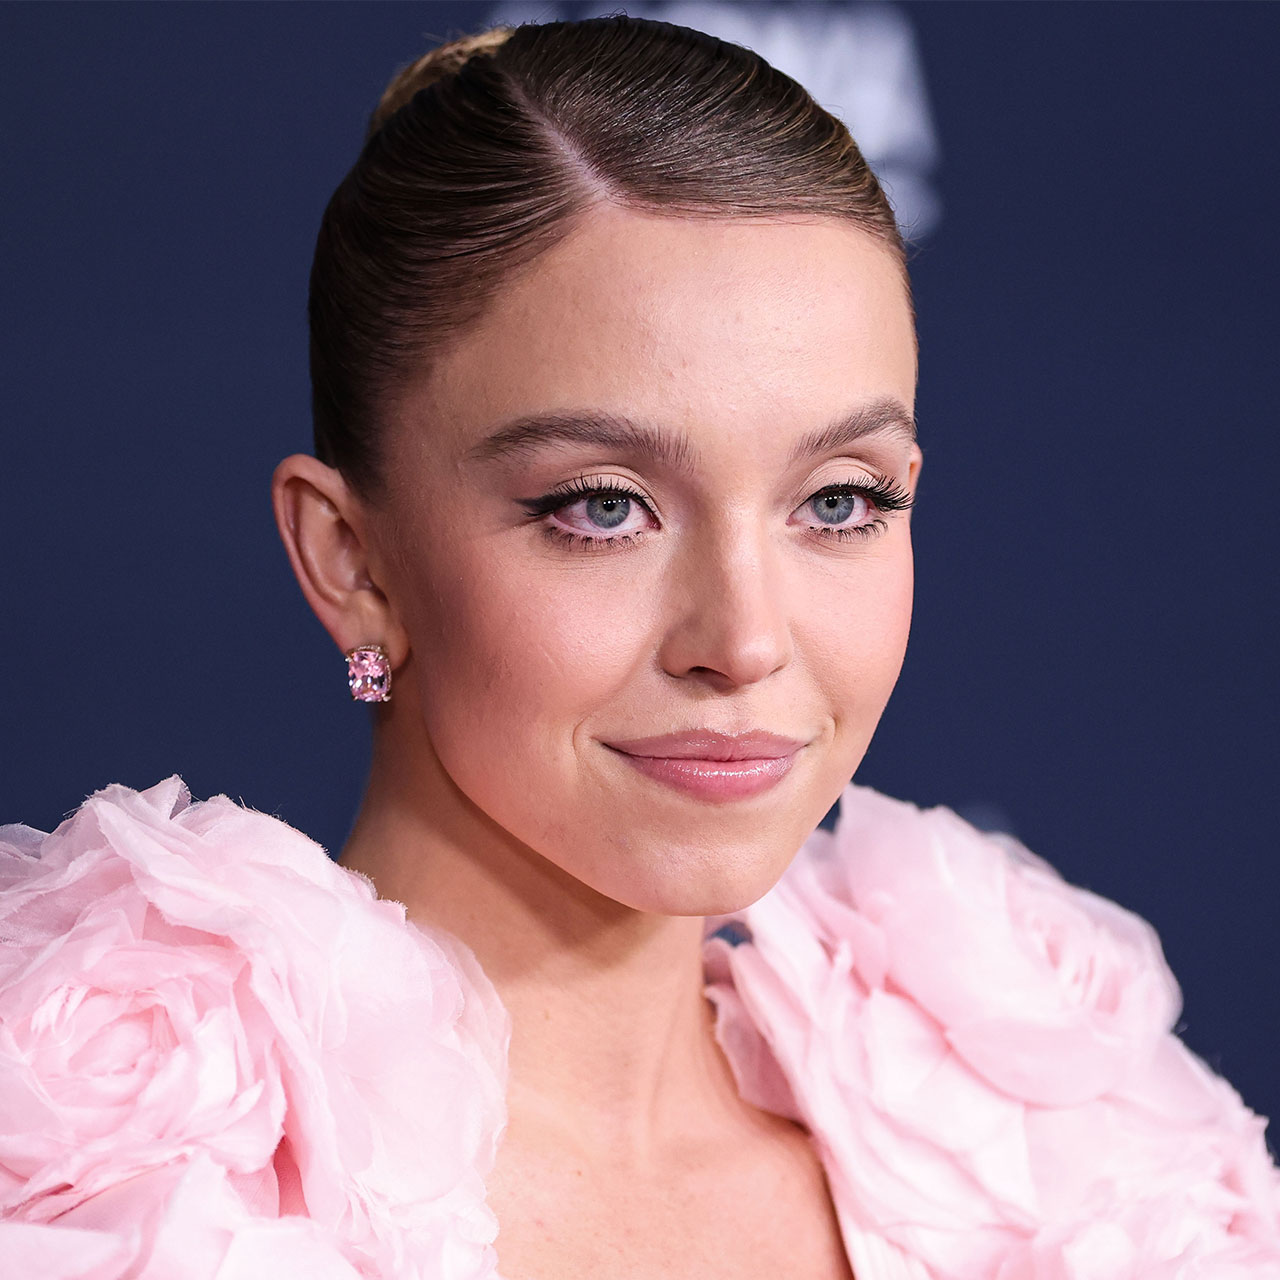 Sydney Sweeney Graces The Cover Of ‘Harper’s Bazaar’ In A Sports Bra & Leather Jacket As Fans React: ‘Absolutely Stunning’